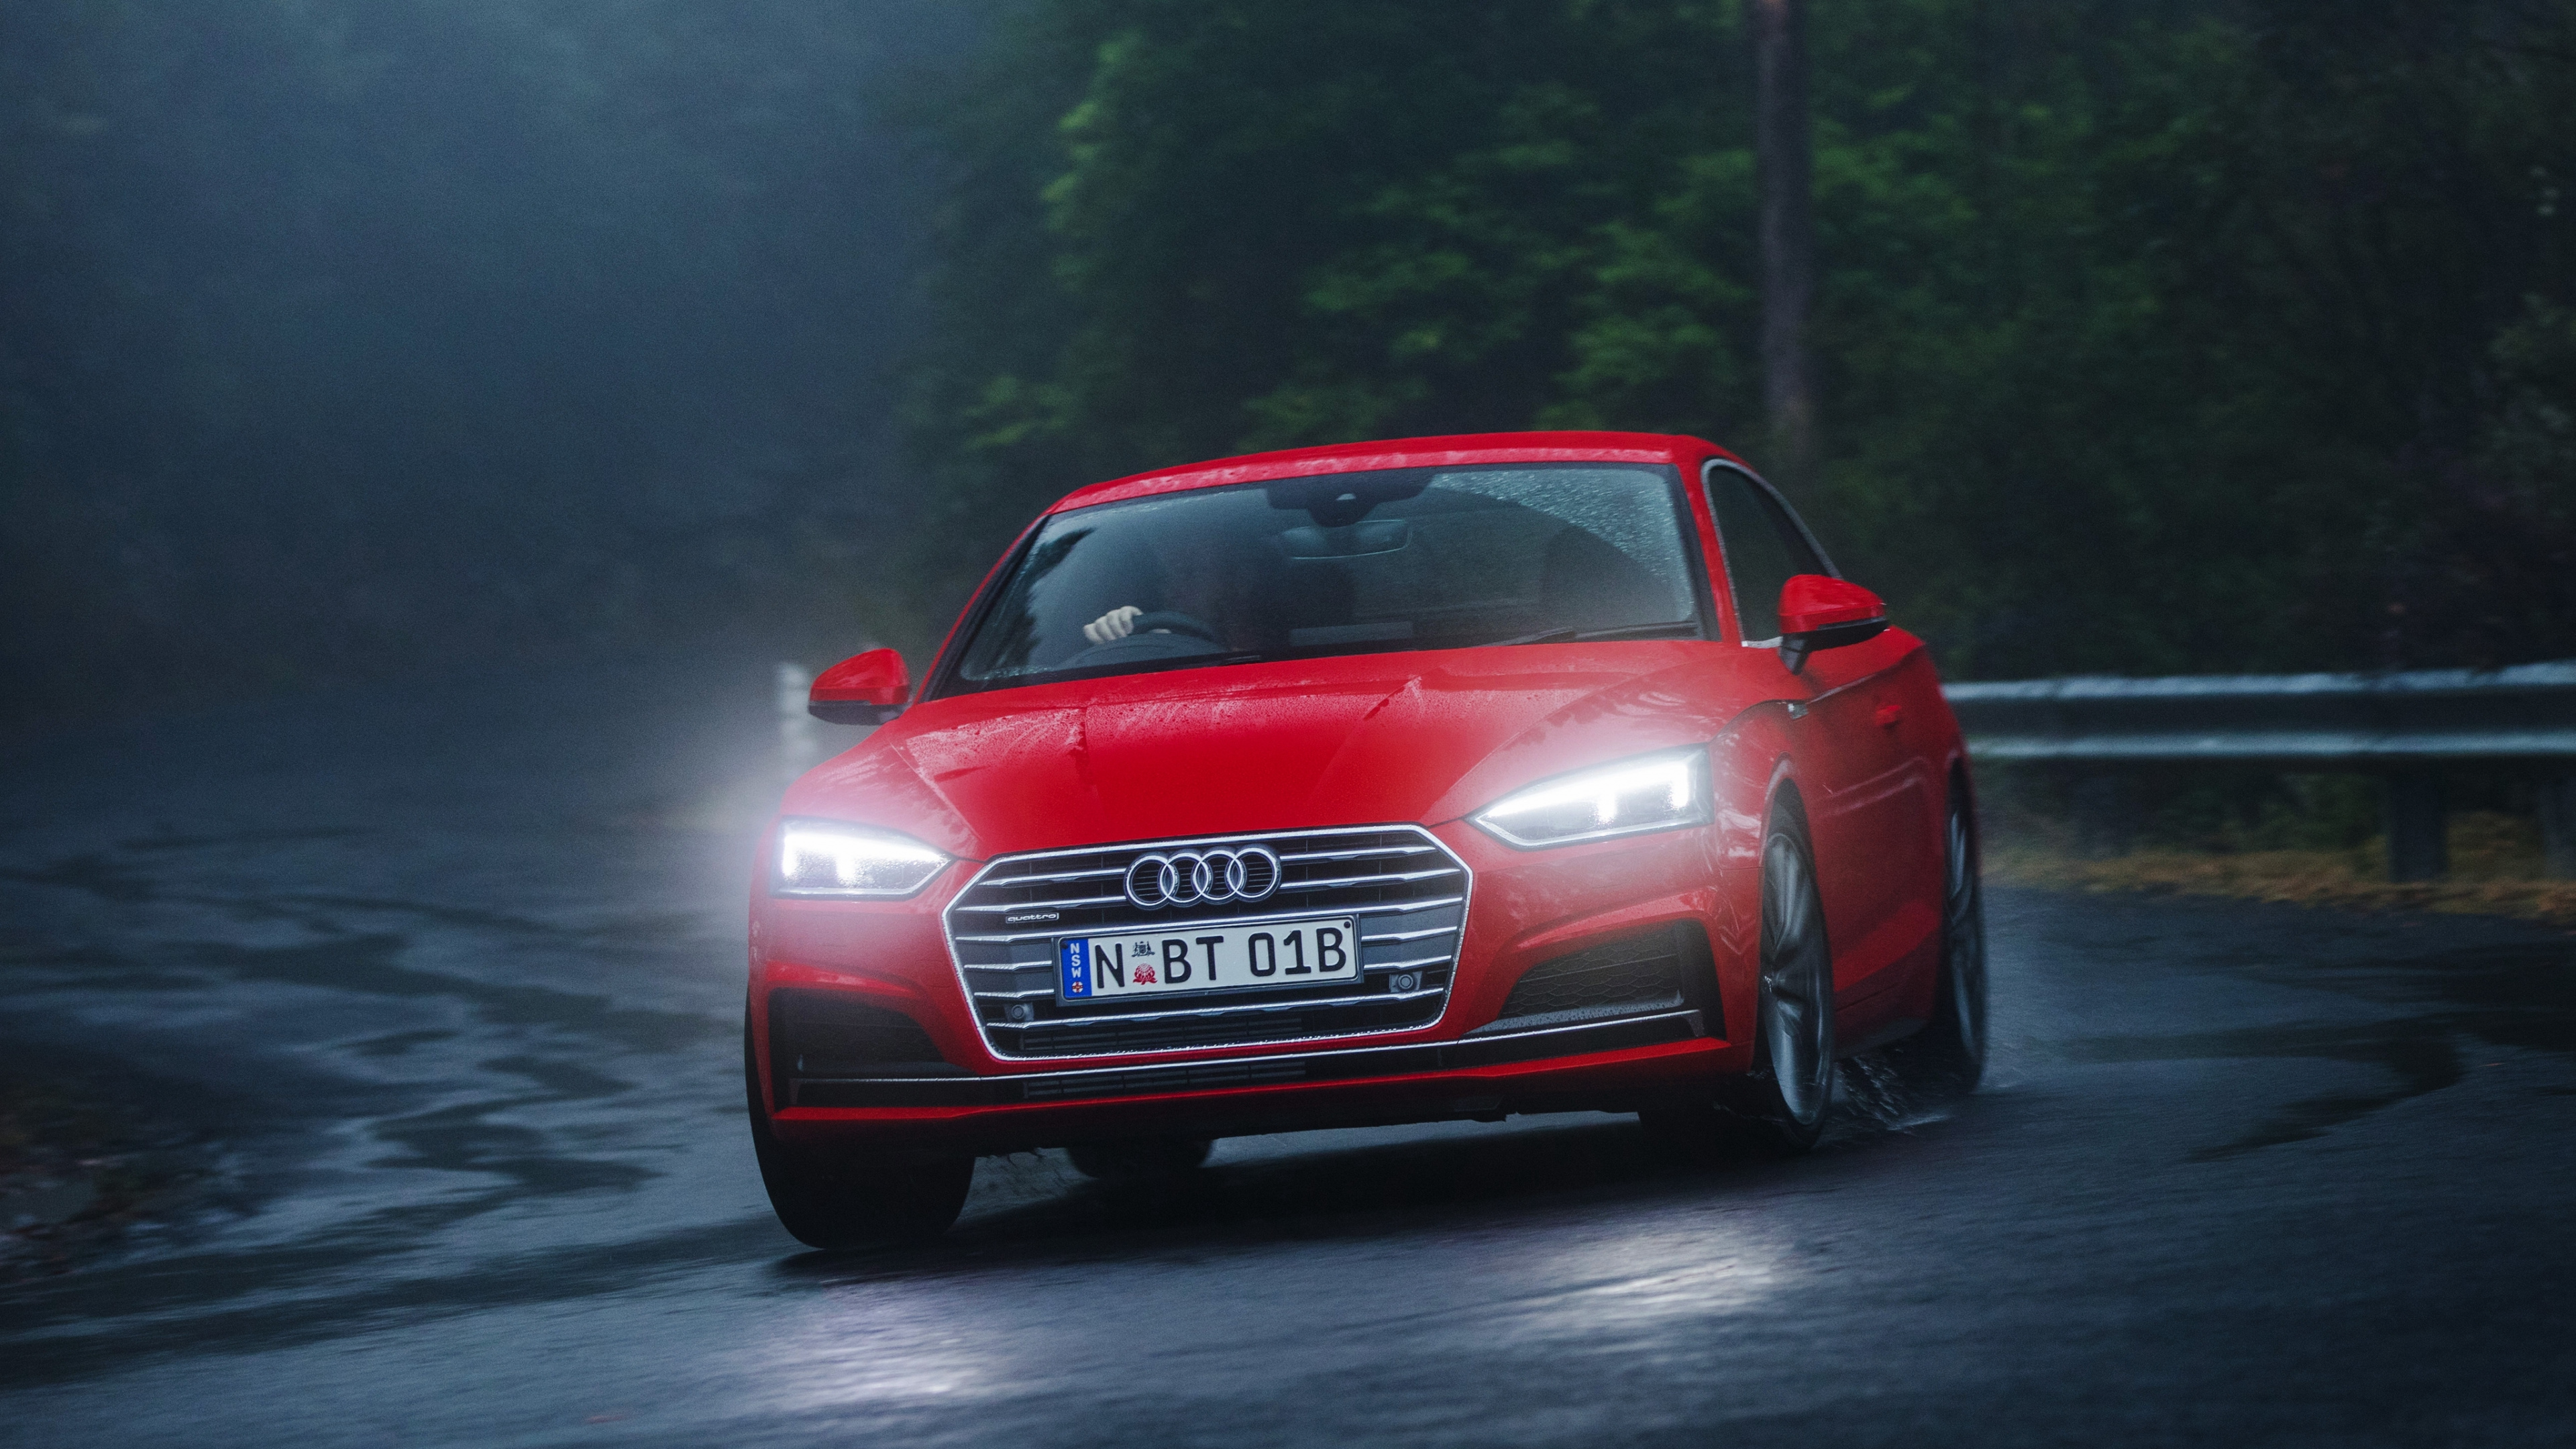 Audi Rouge a 4 Sur Route. Wallpaper in 3840x2160 Resolution